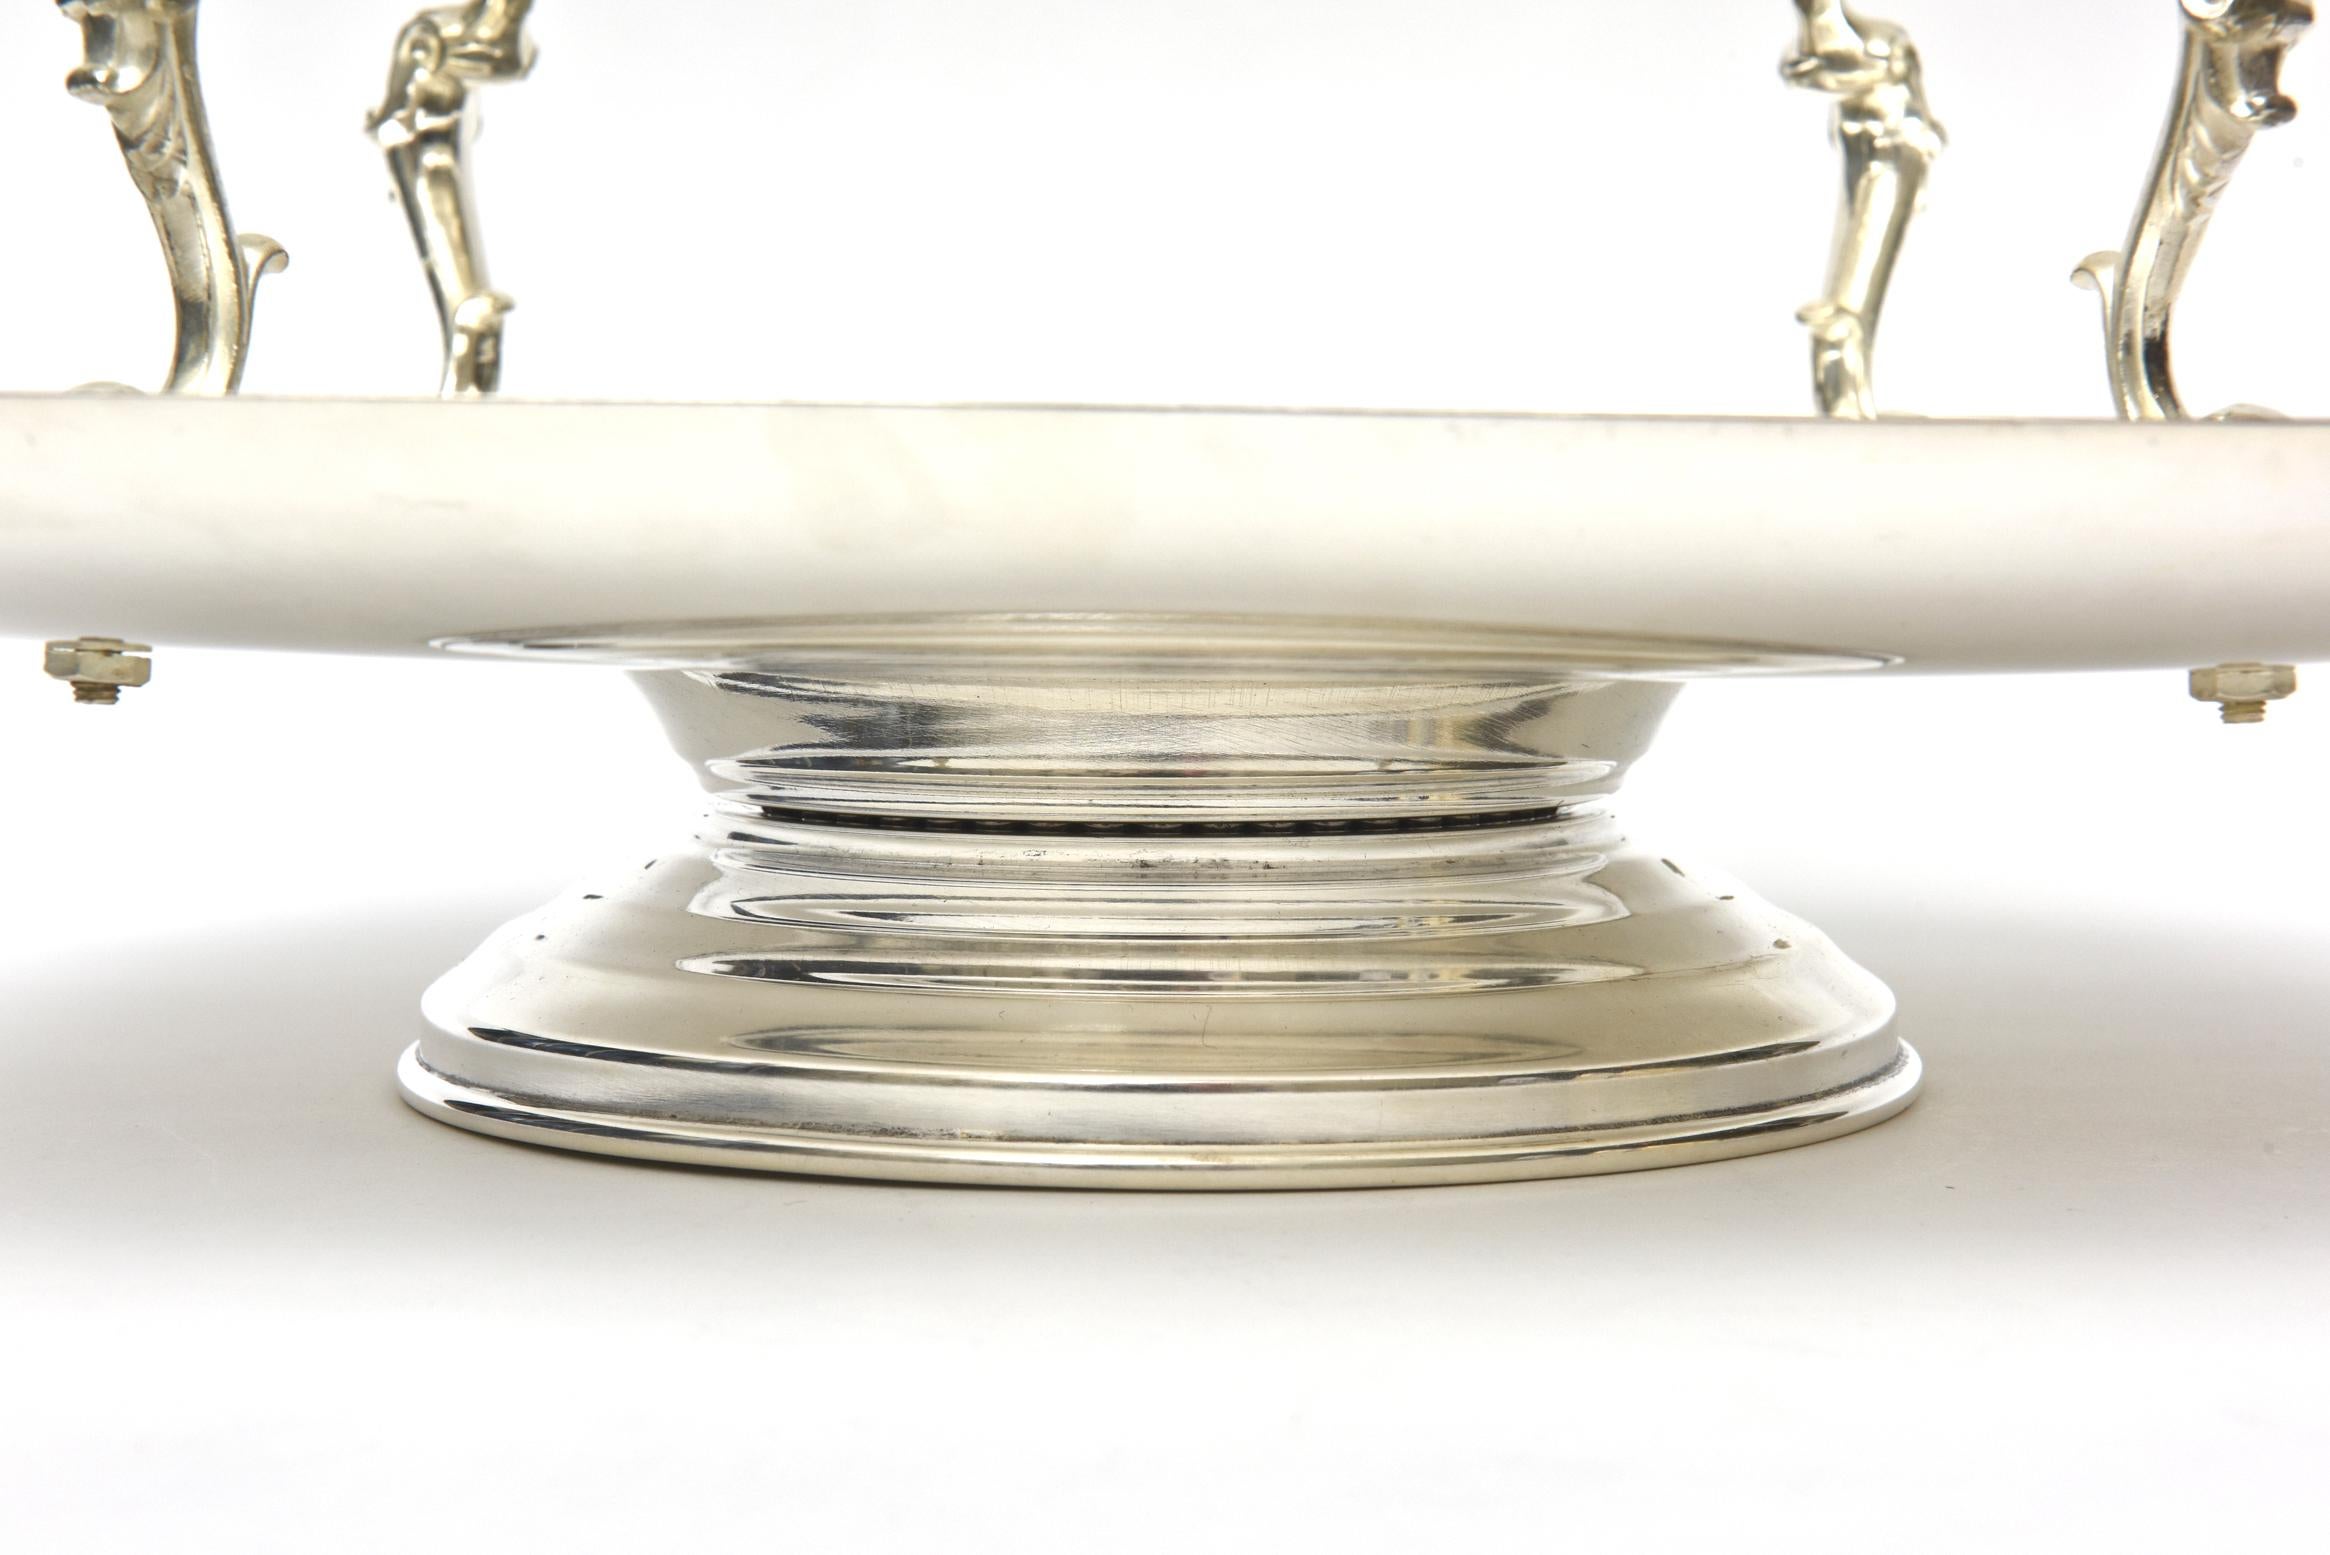 Late 20th Century Vintage Silver-Plate Swivel Serving Caddy or Serving Piece For Sale